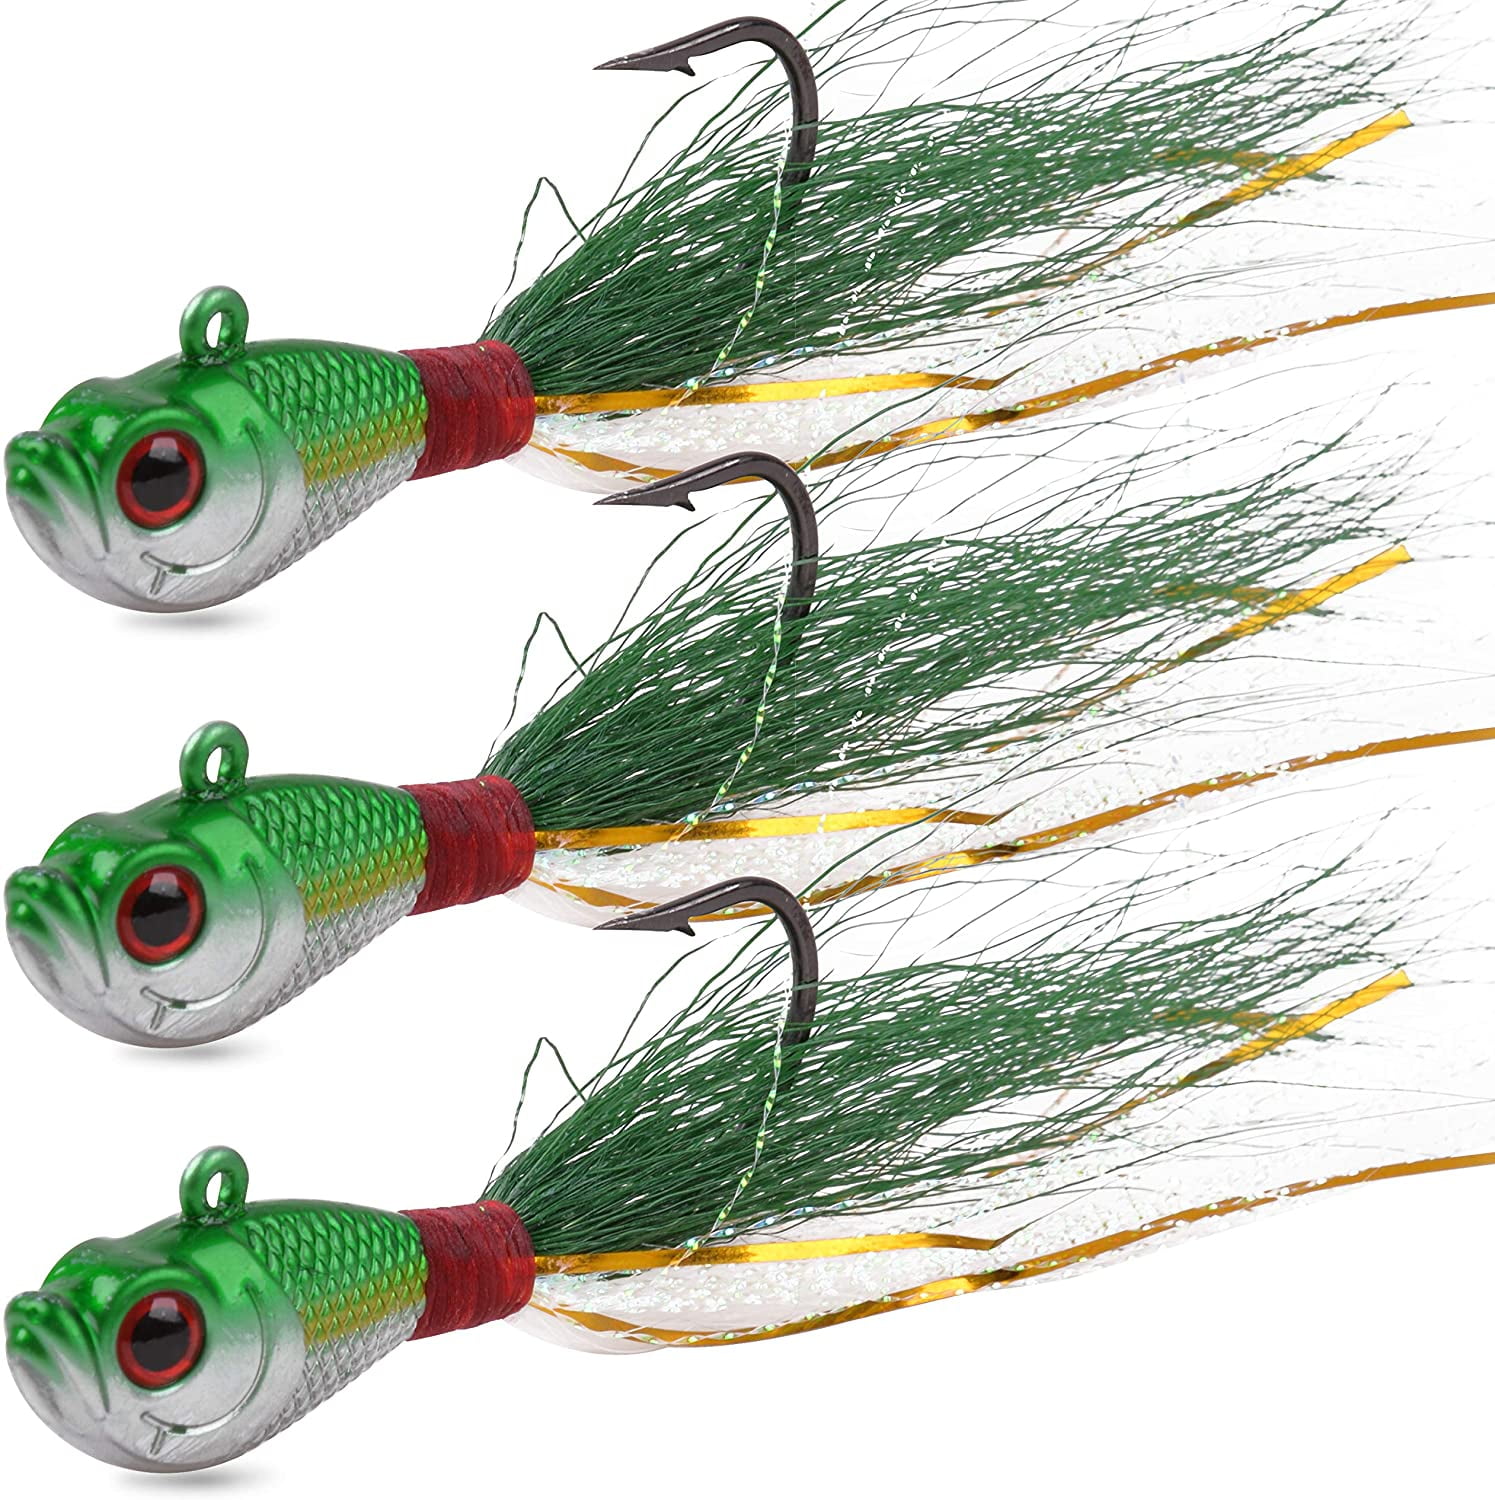 3 Packs Saltwater Bucktail Jigs Red And Yellow 